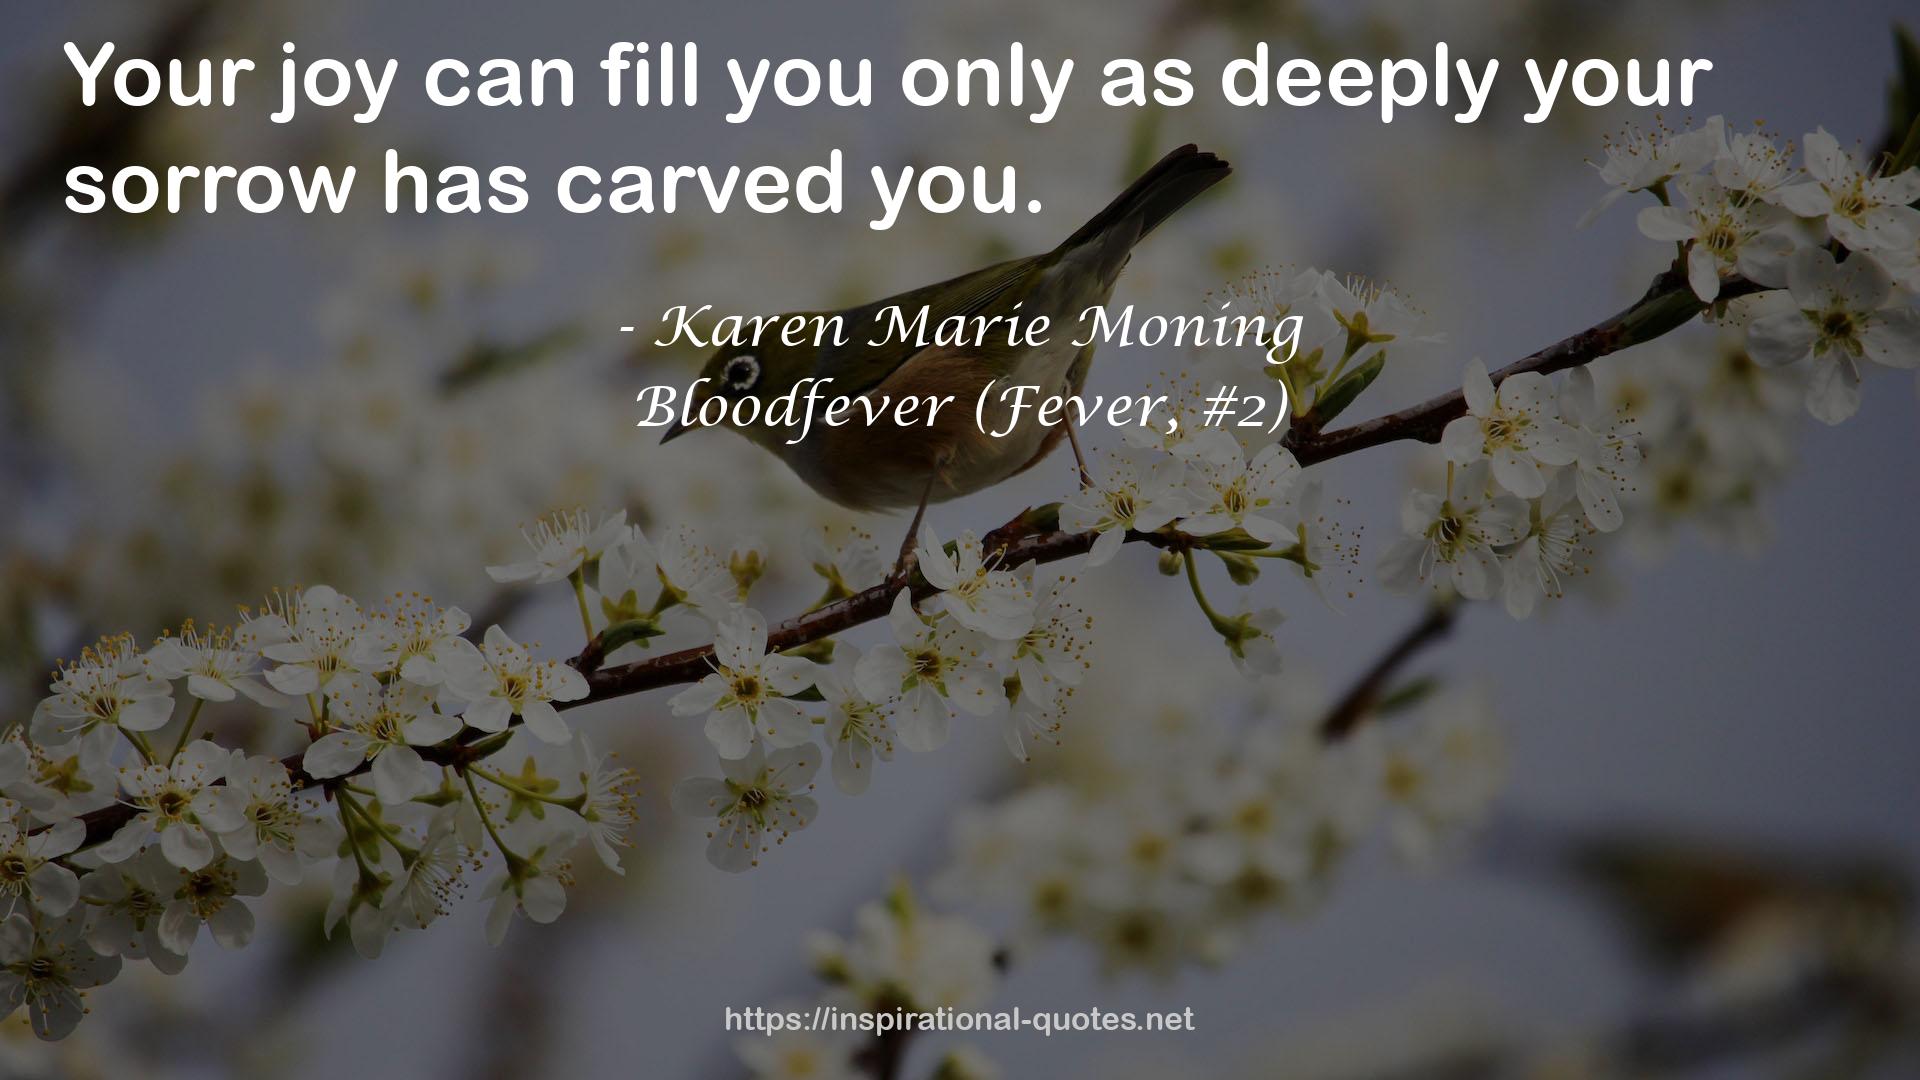 Bloodfever (Fever, #2) QUOTES